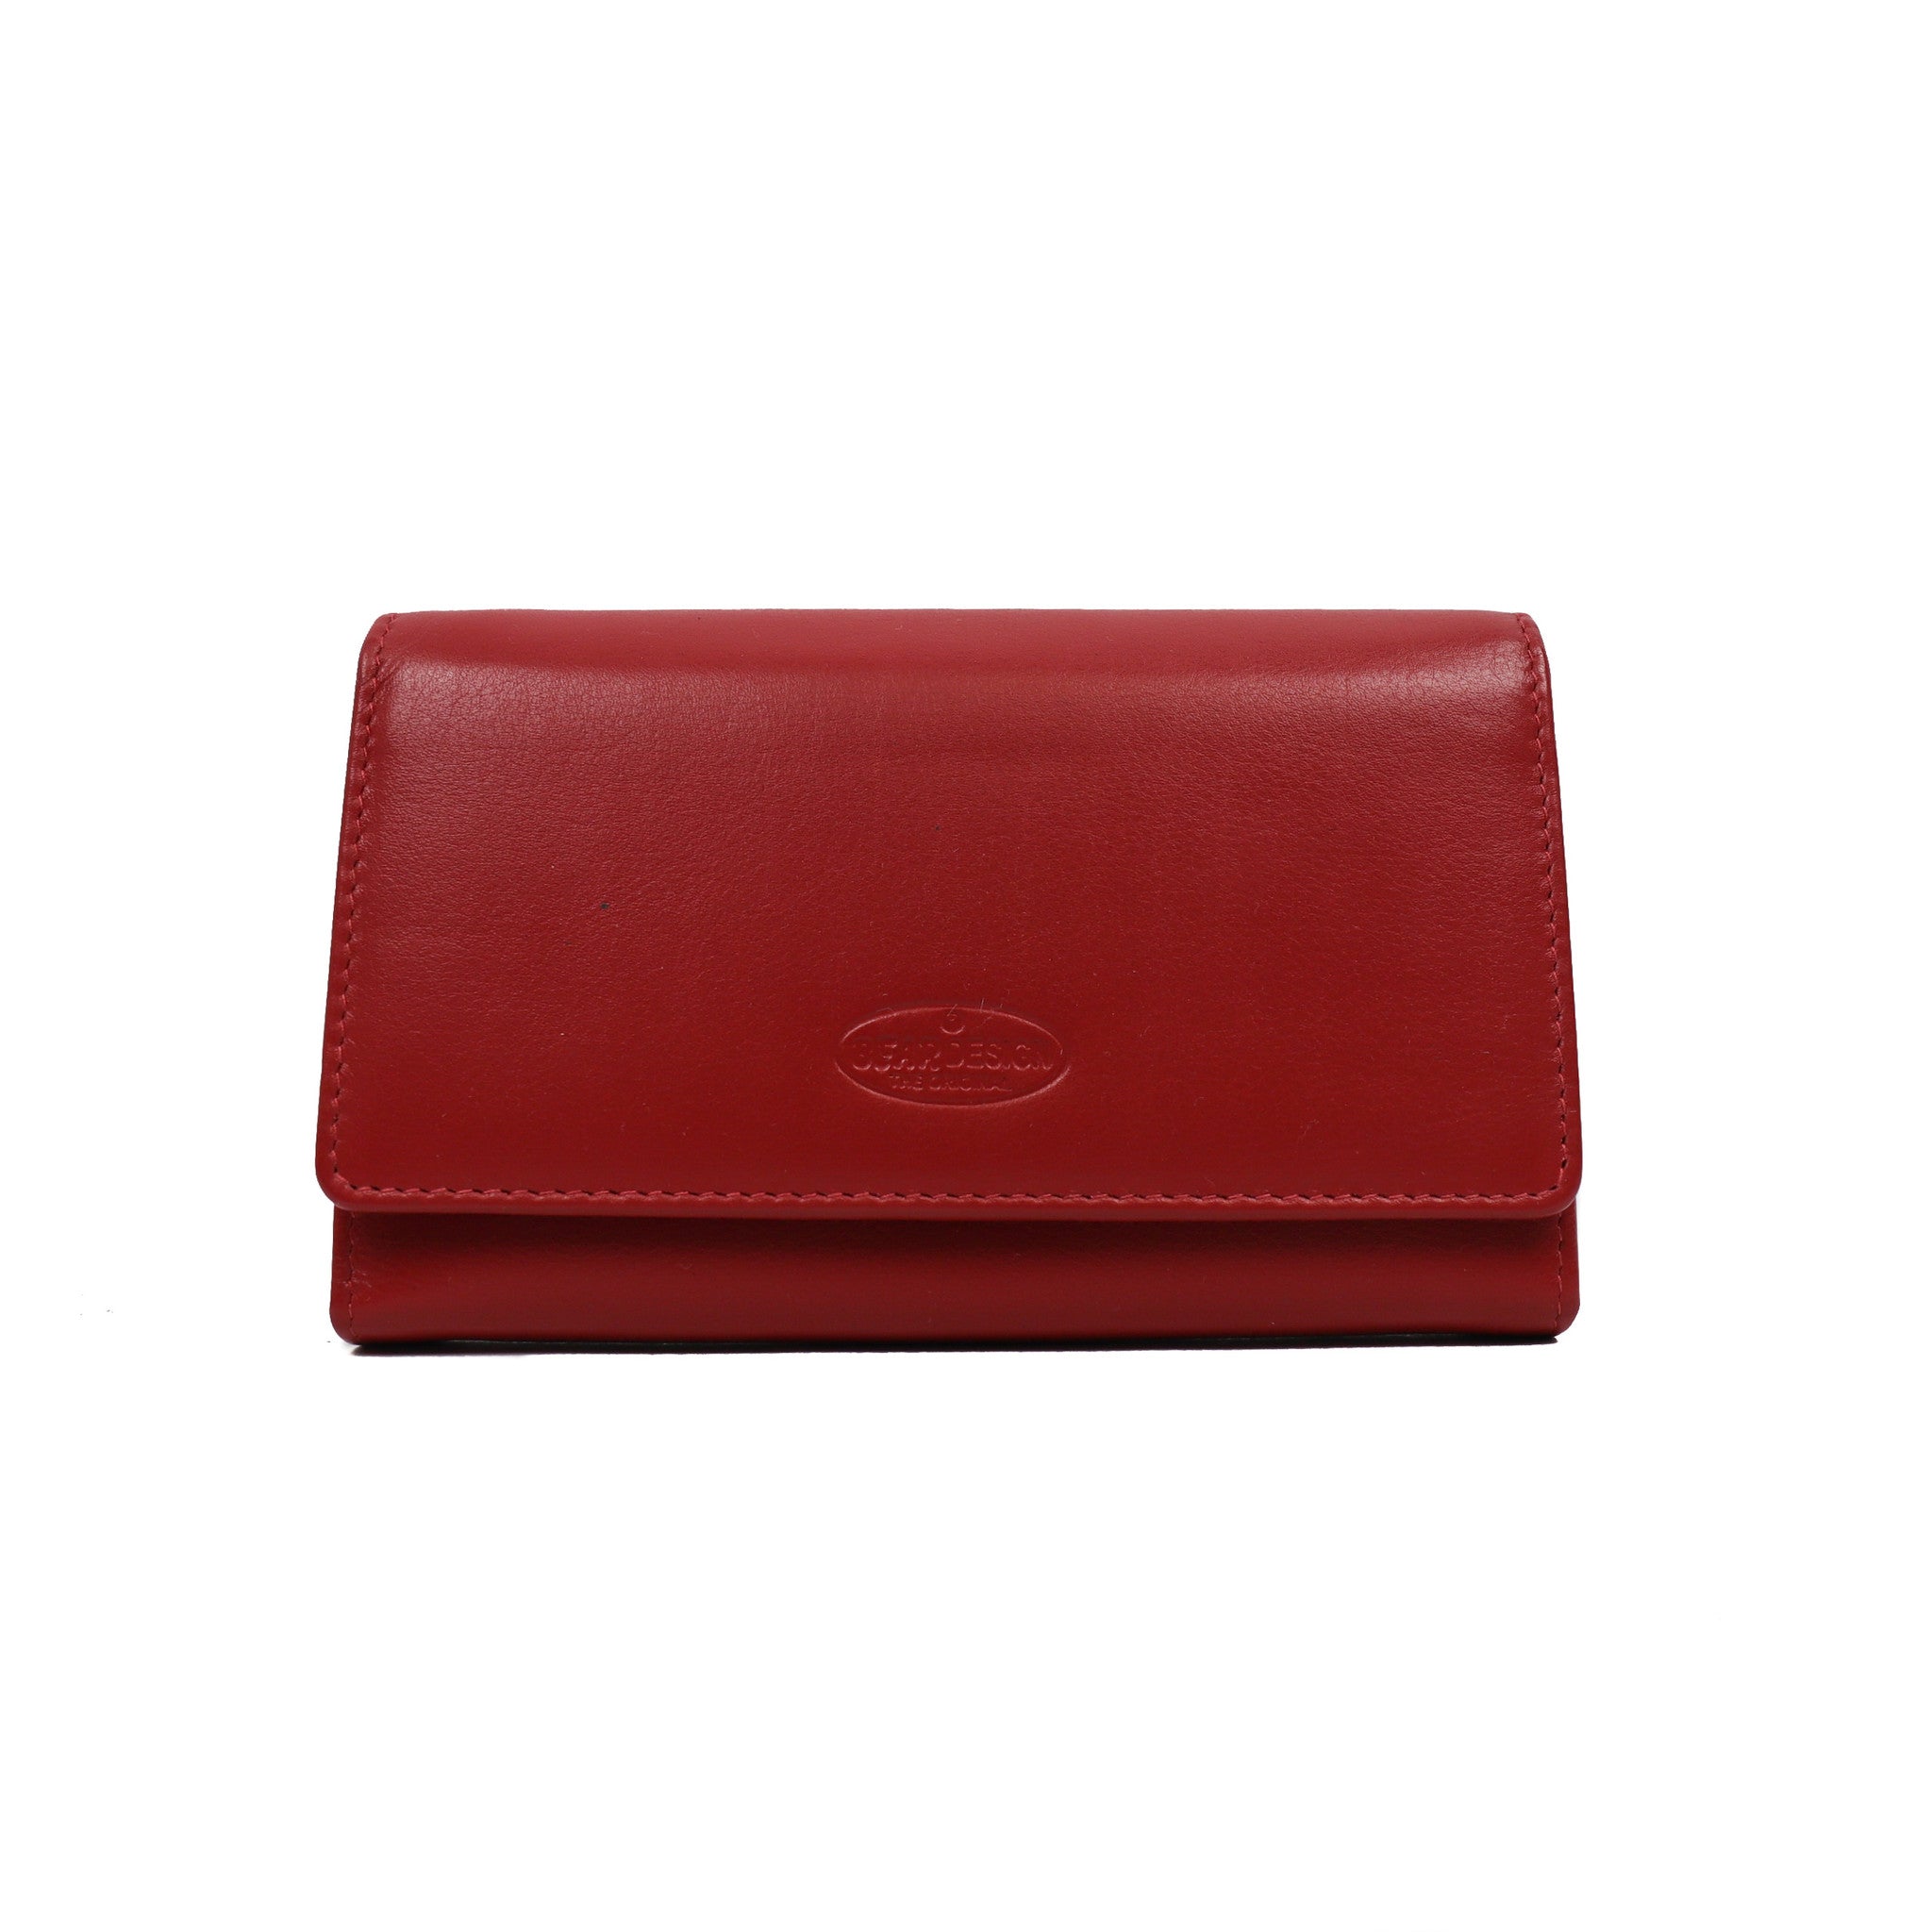 Wrap wallet 'Lizzy' red - FR 9925